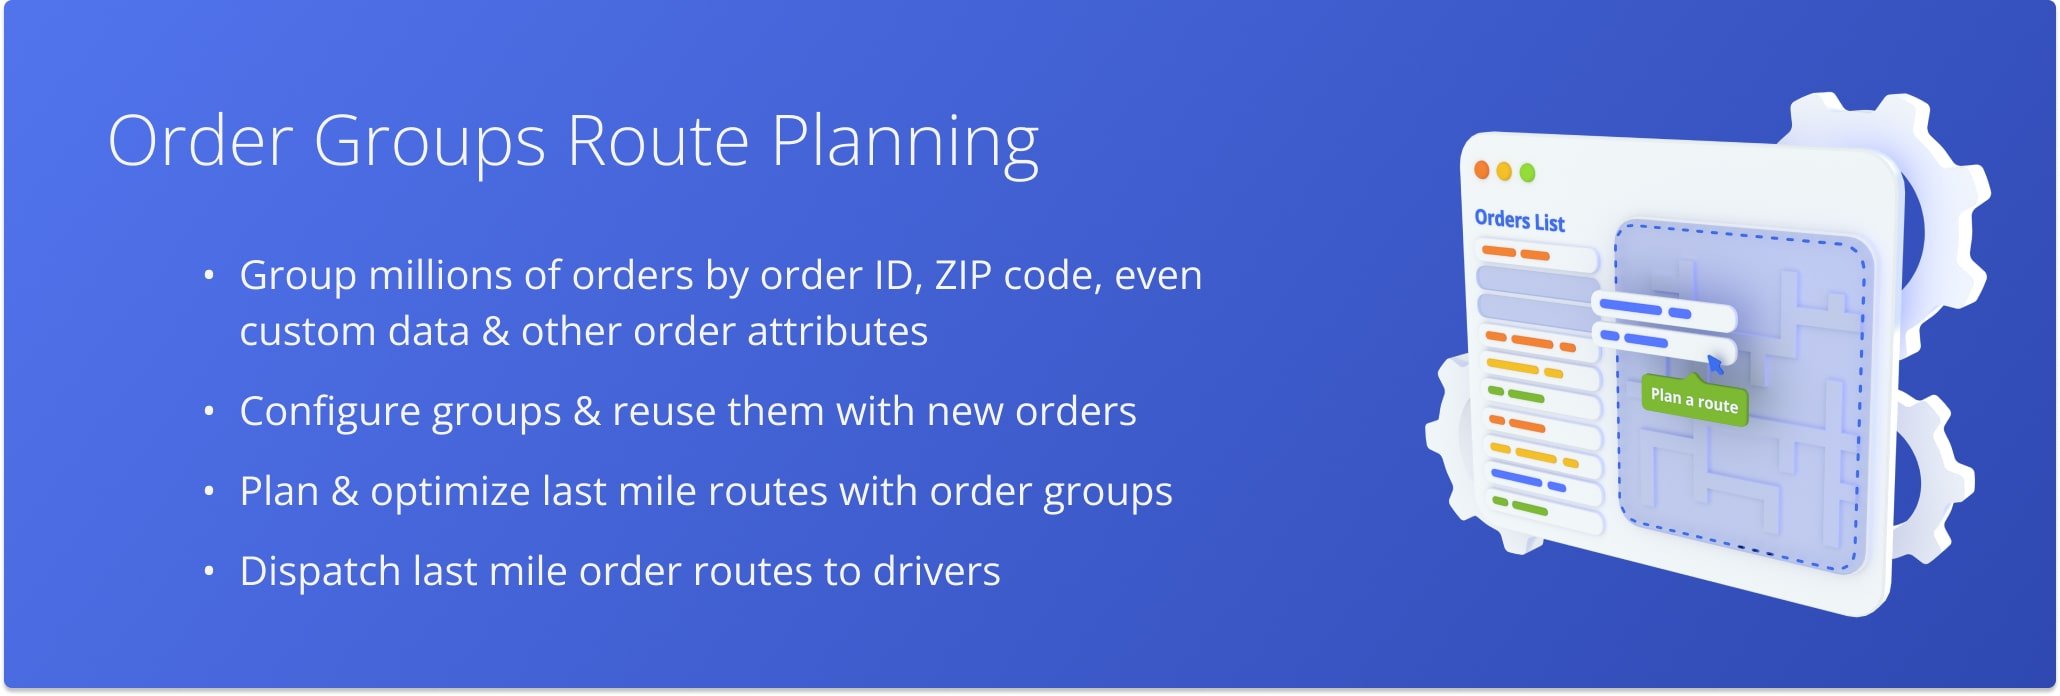 Route4Me's Routing With Orders: grouping orders by ZIP Code, Custom Data, and IDs for recurring route planning and optimization.